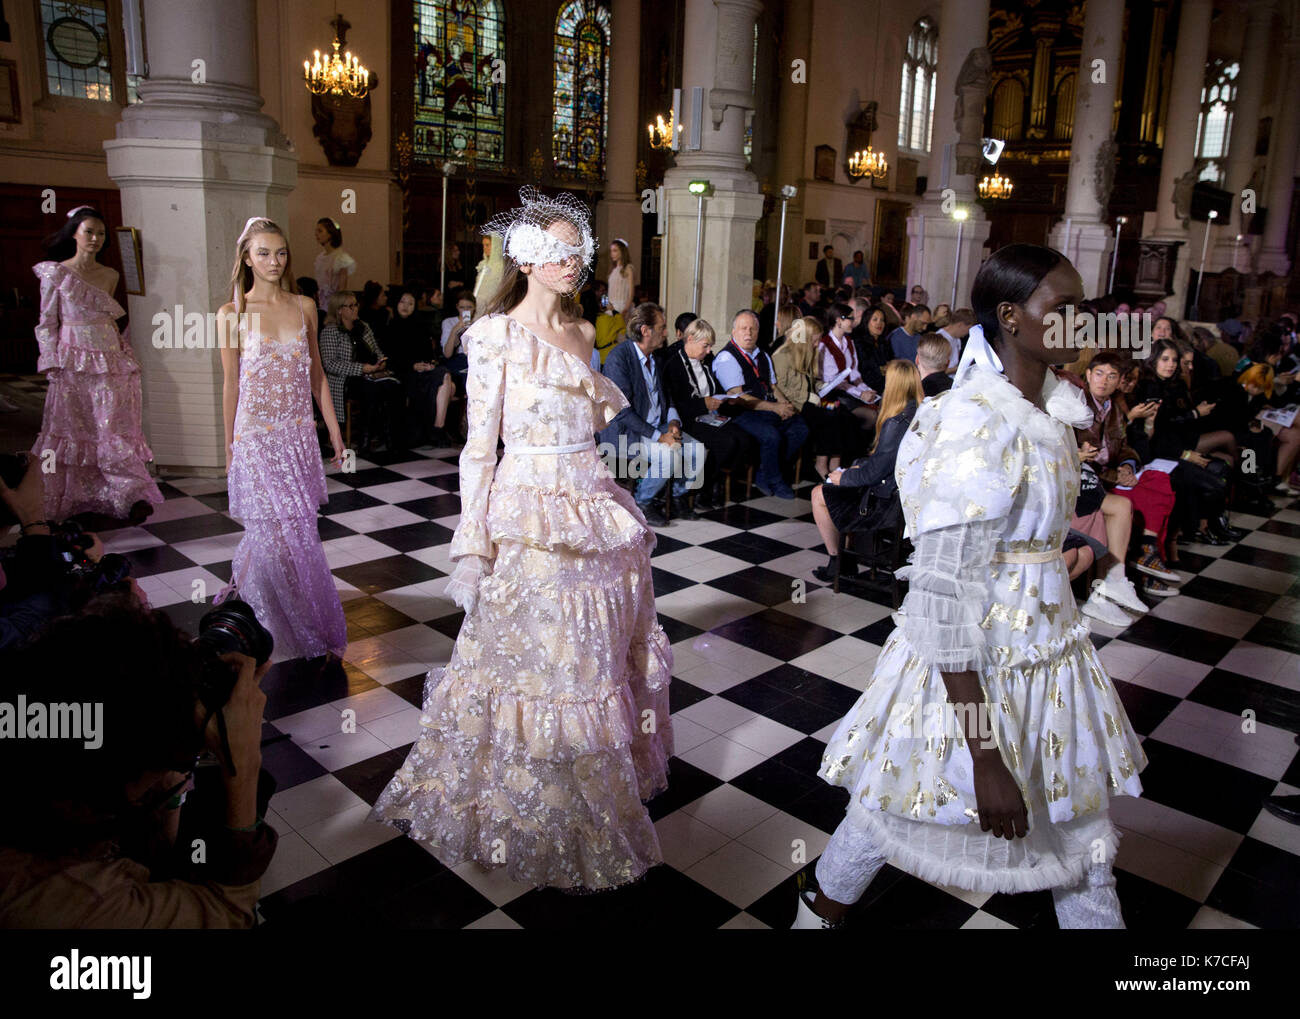 Models on the catwalk during the Ryan LO London Fashion Week SS18 show held at St Sepulchre-without-Newgate Church, London. Stock Photo